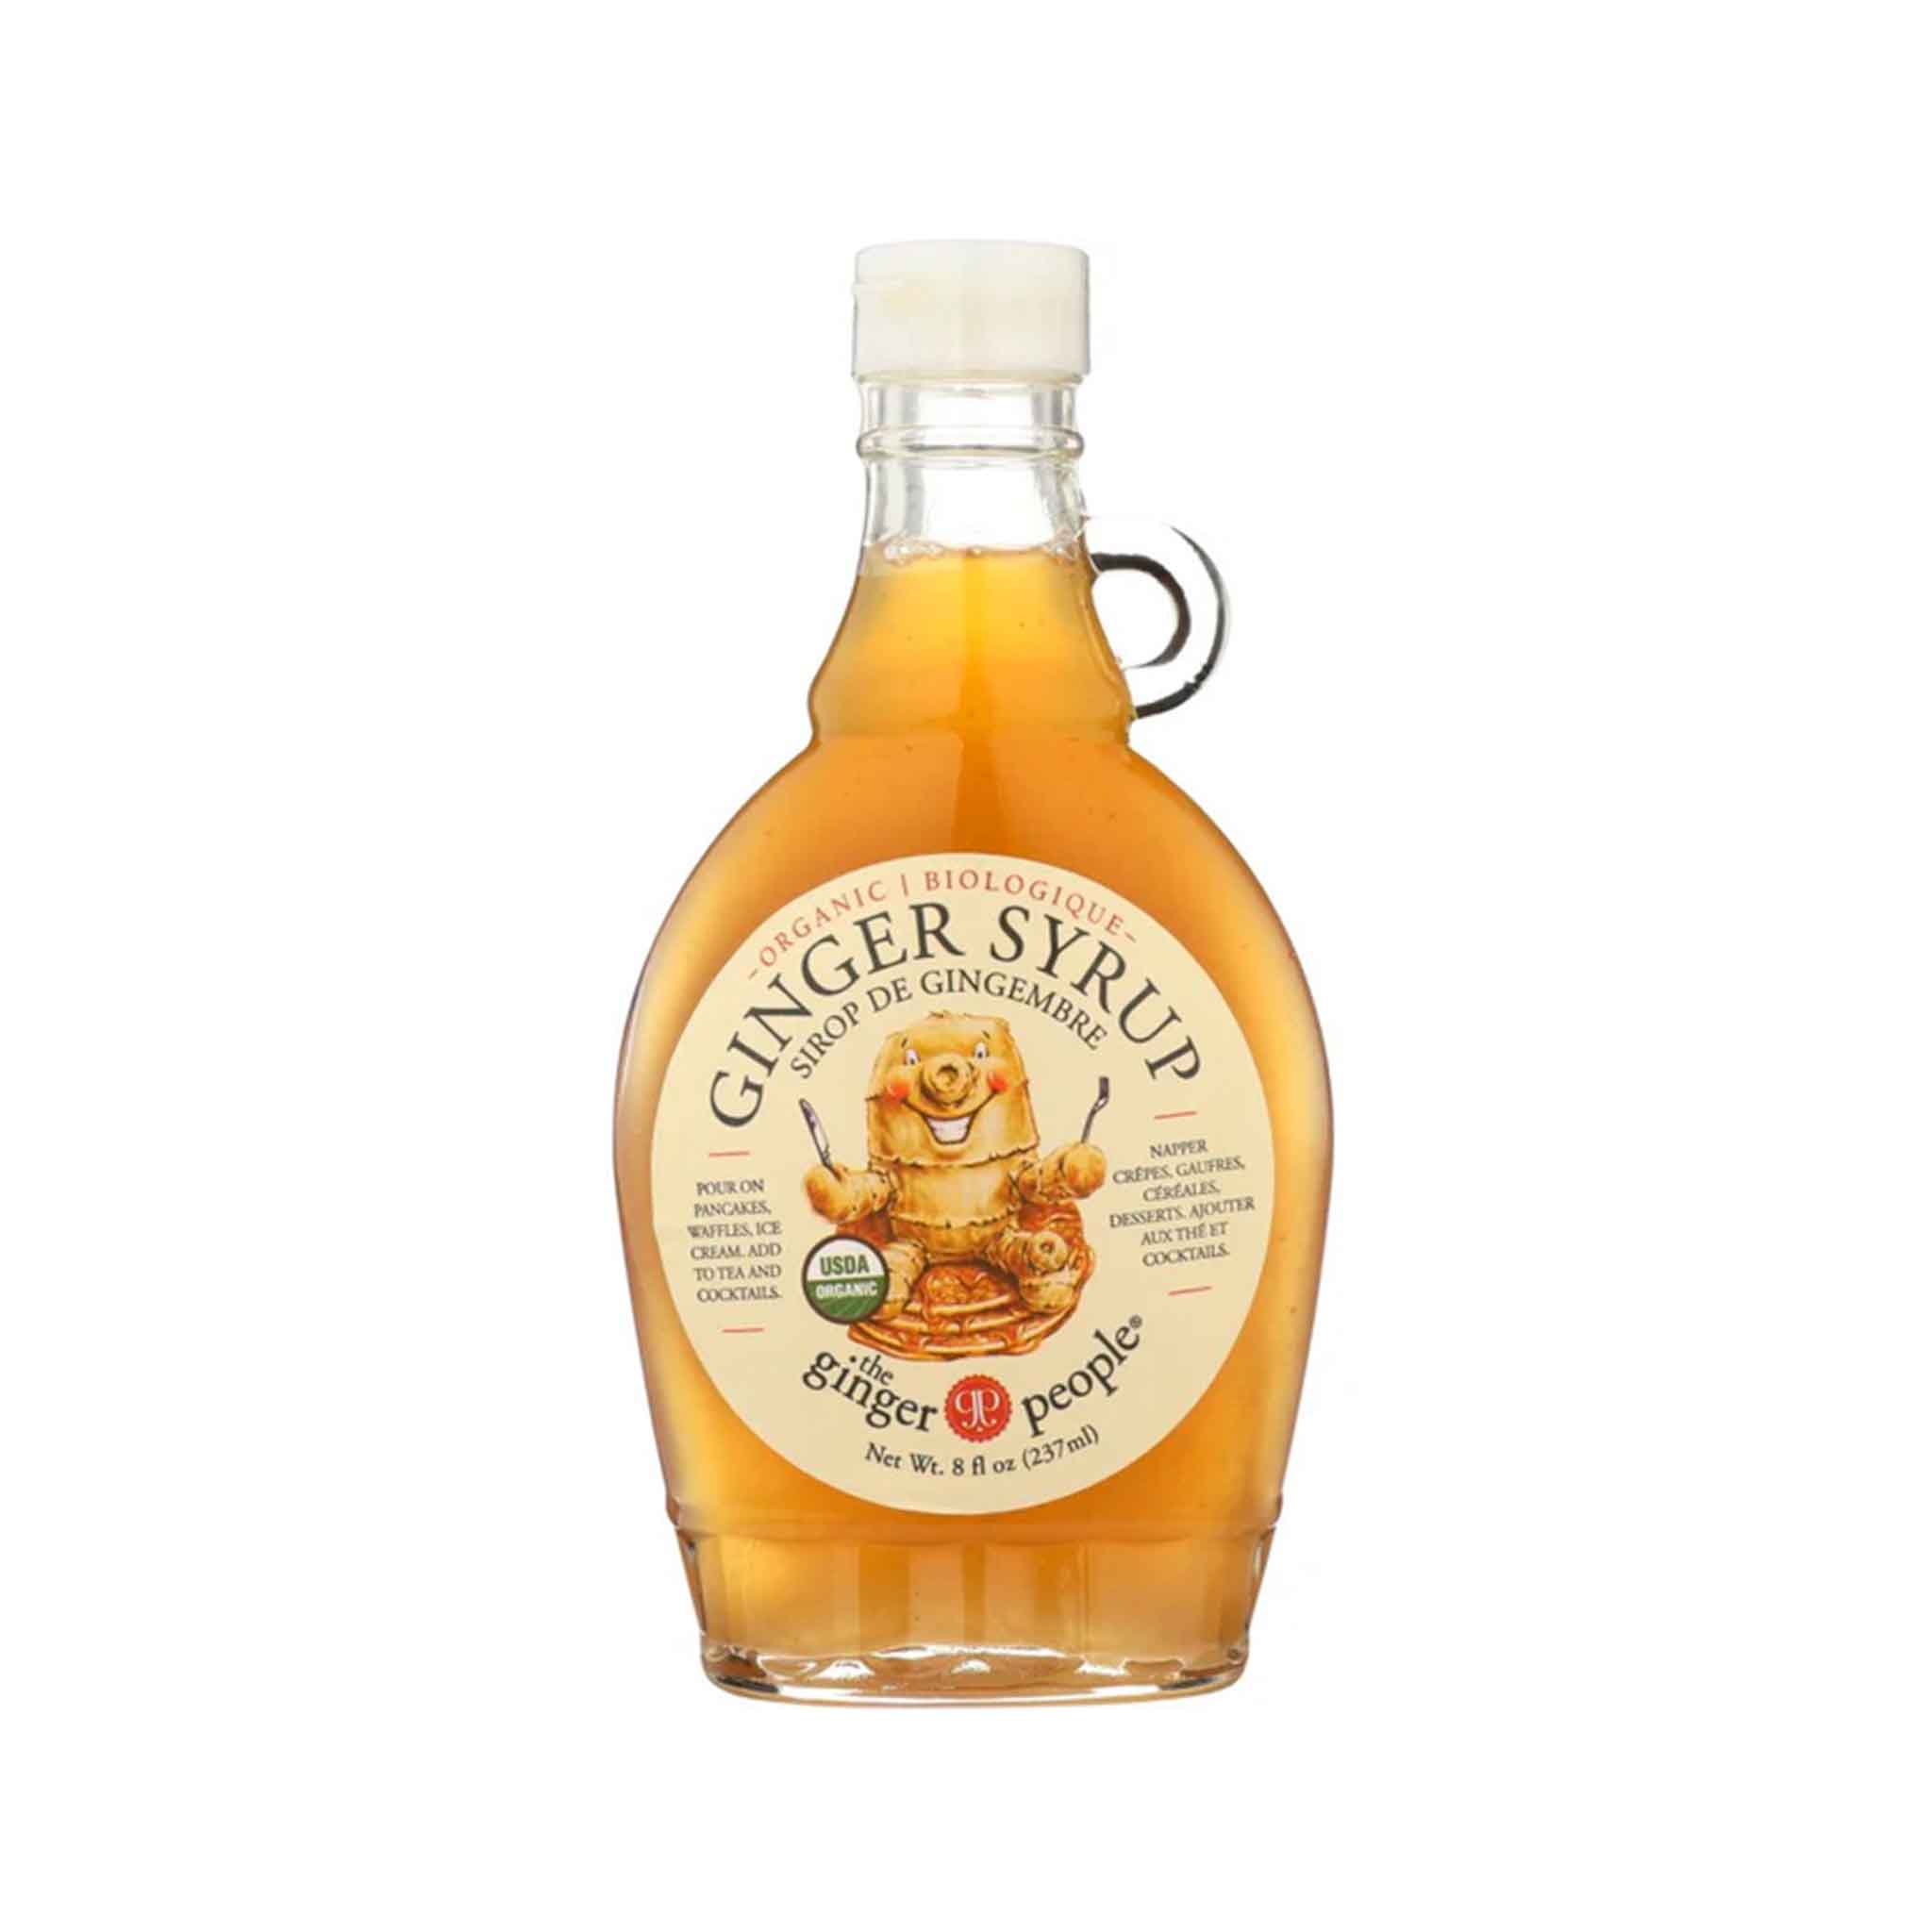 THE GINGER PEOPLE GINGER SYRUP 8oz